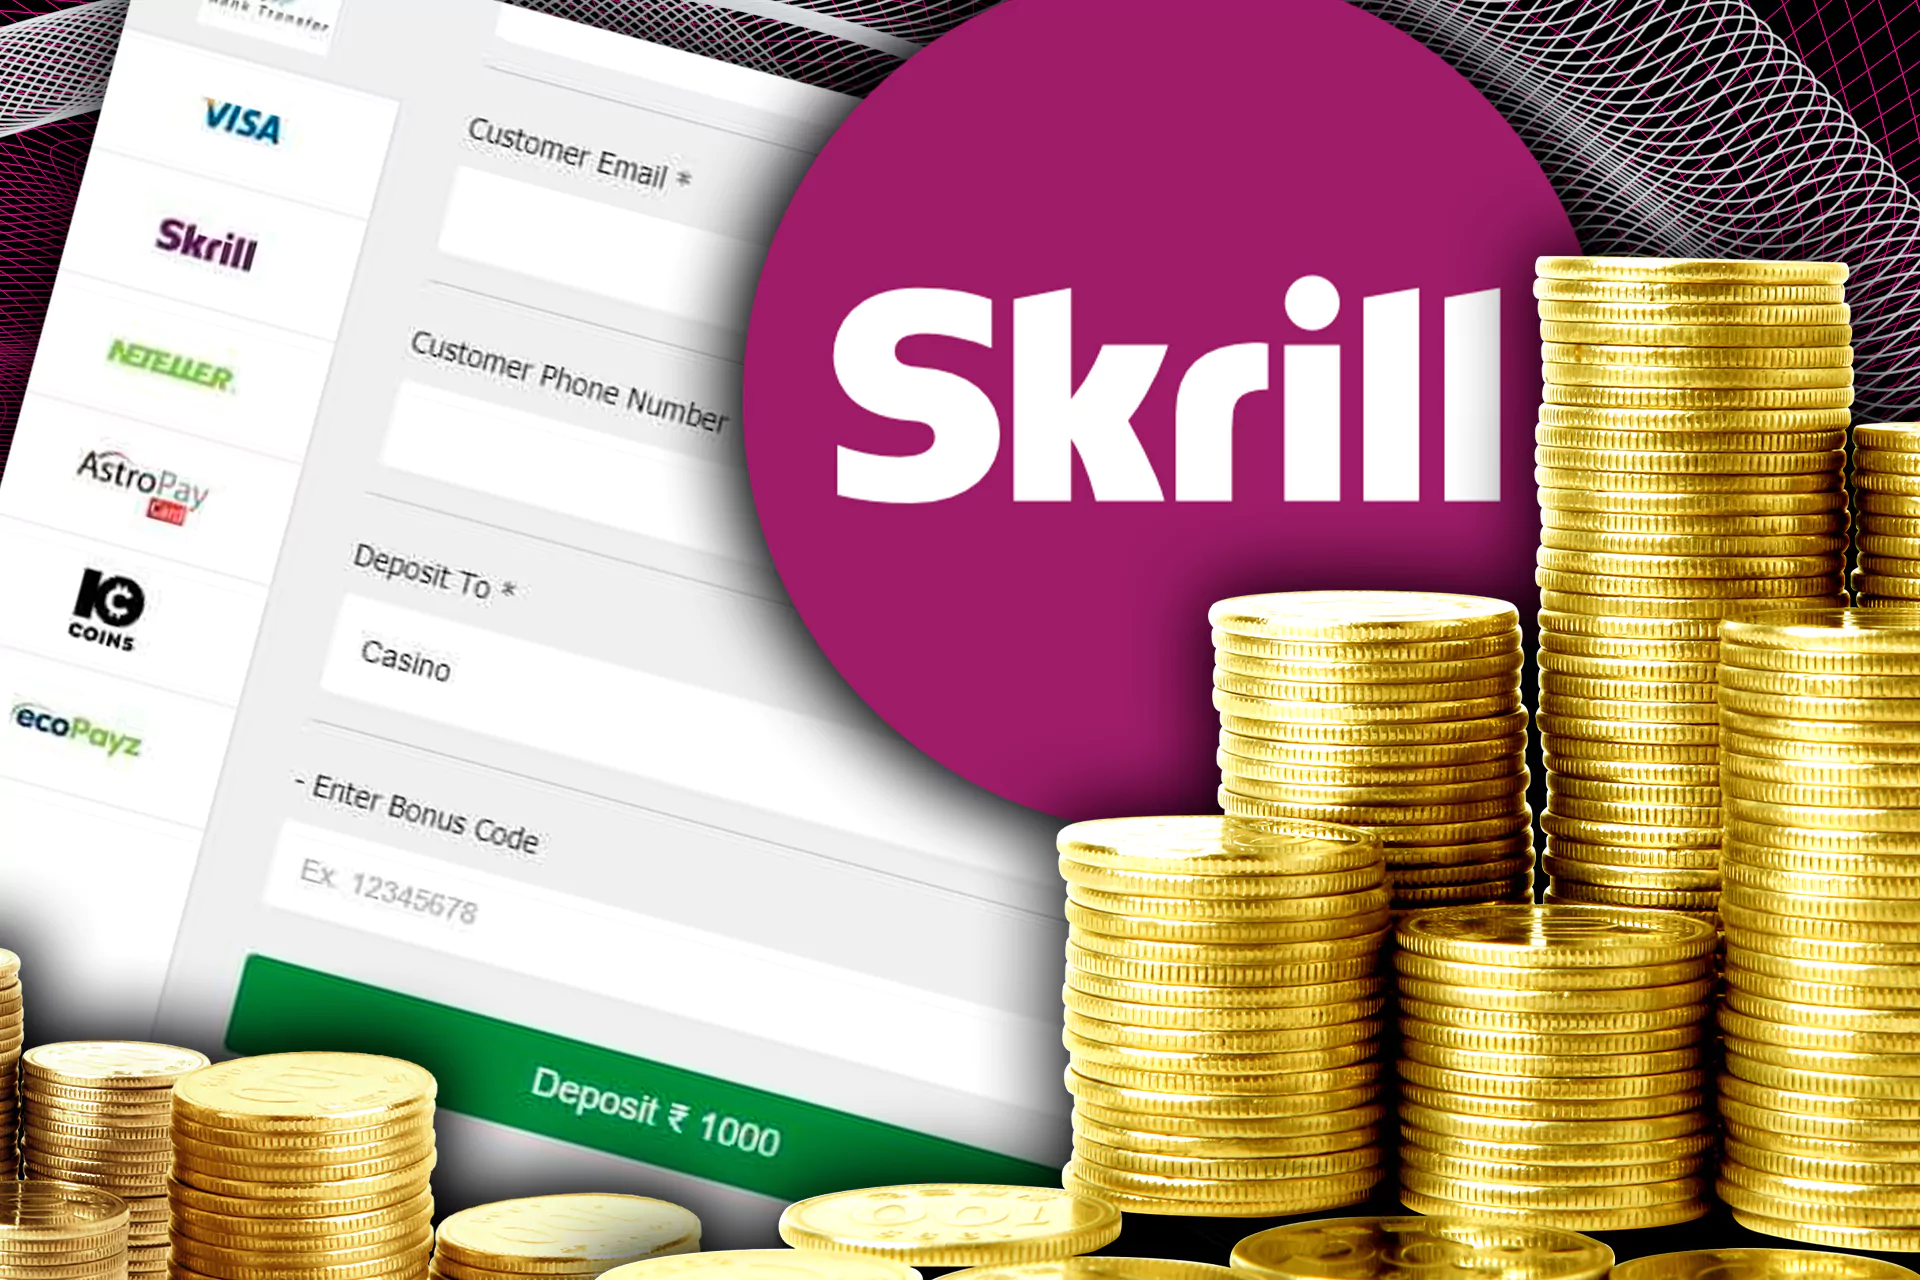 Use Skrill to top up your account at the betting site.